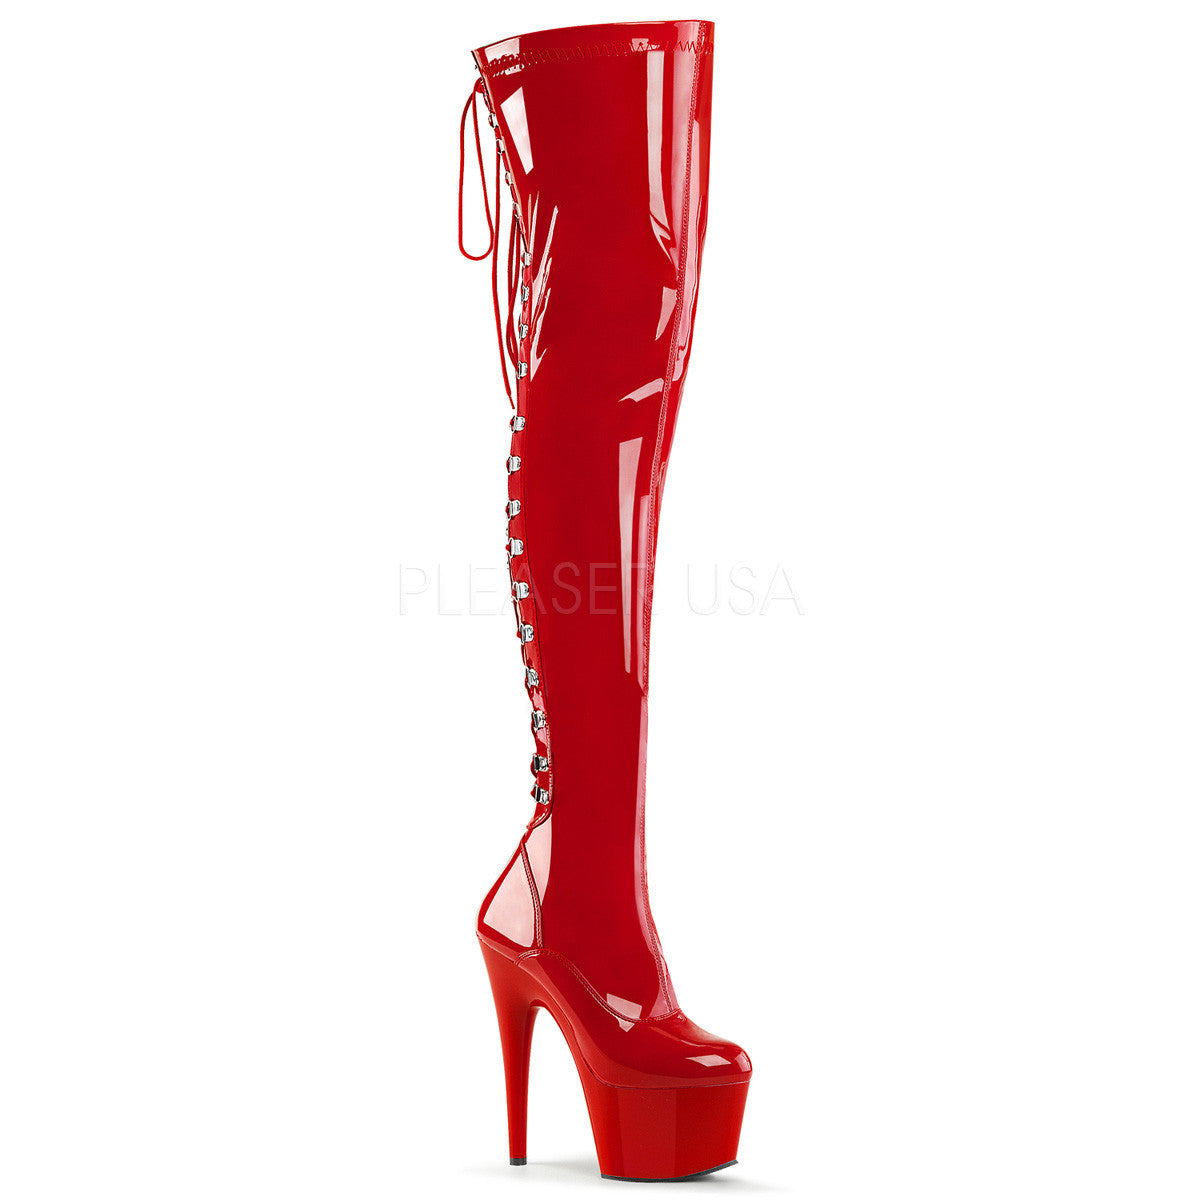 Pleaser ADORE-3063 Red Stretch Pat Thigh High Boots - Shoecup.com